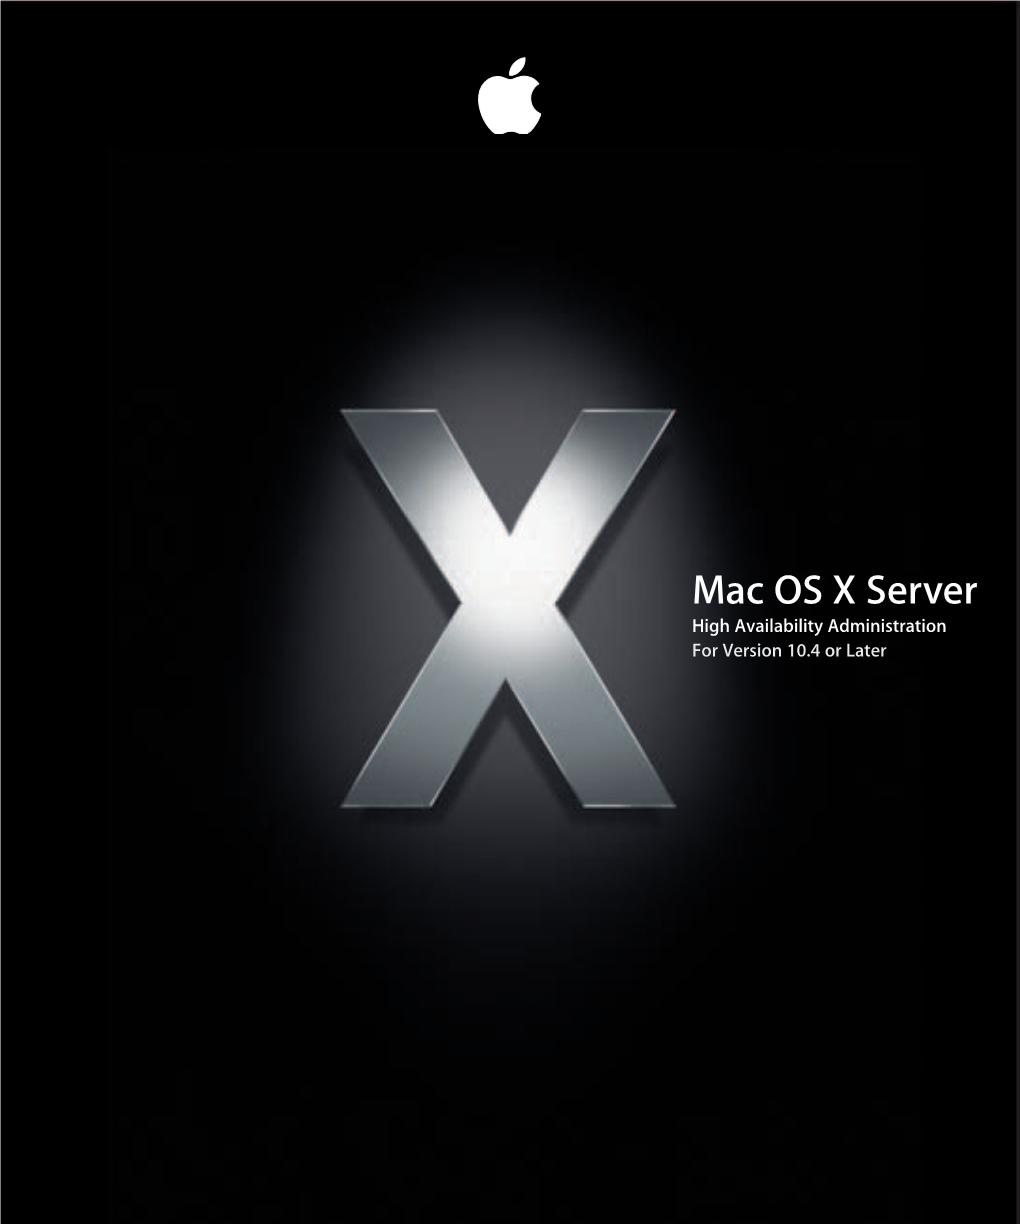 Mac OS X Server High Availability Administration for Version 10.4 Or Later